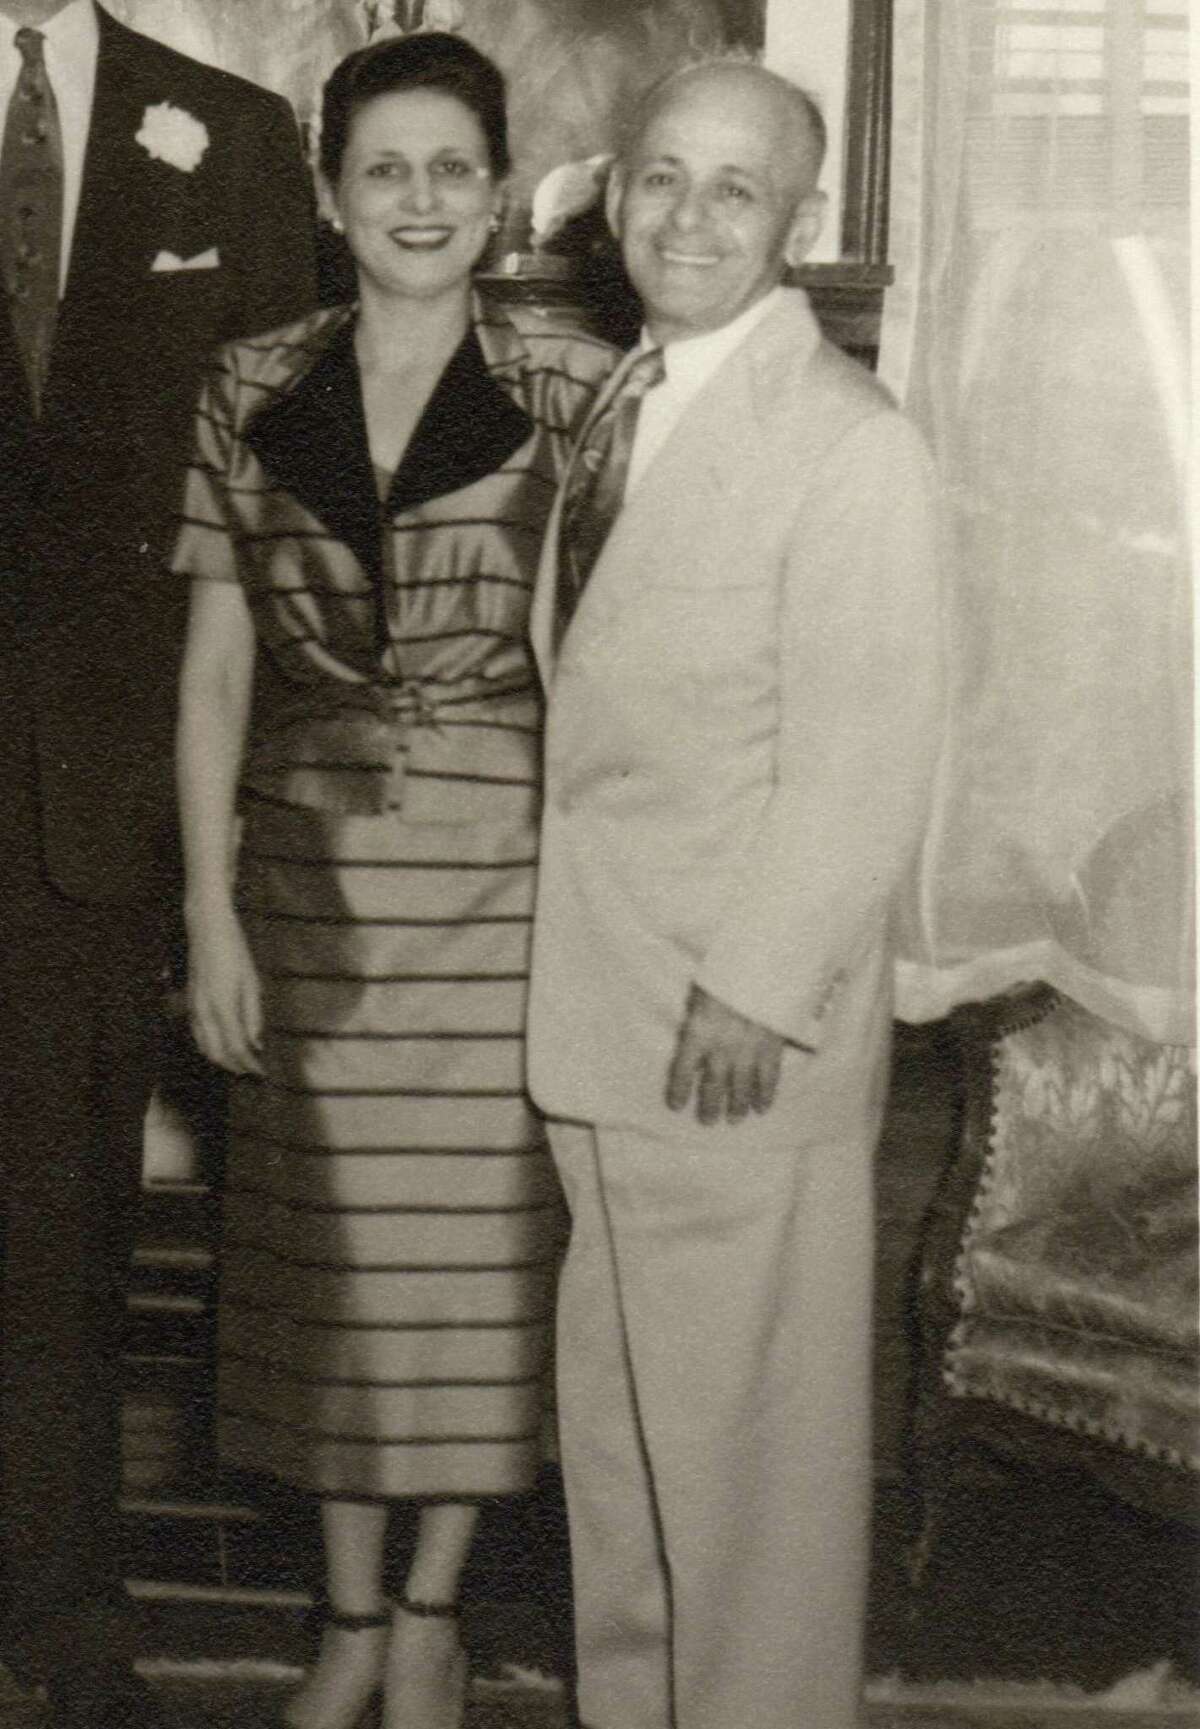 Toffe 'Charlie' Satel and his wife Selma, who operated a tailoring business near Fort Sam Houston; they moved to Alamo Heights in 1931.